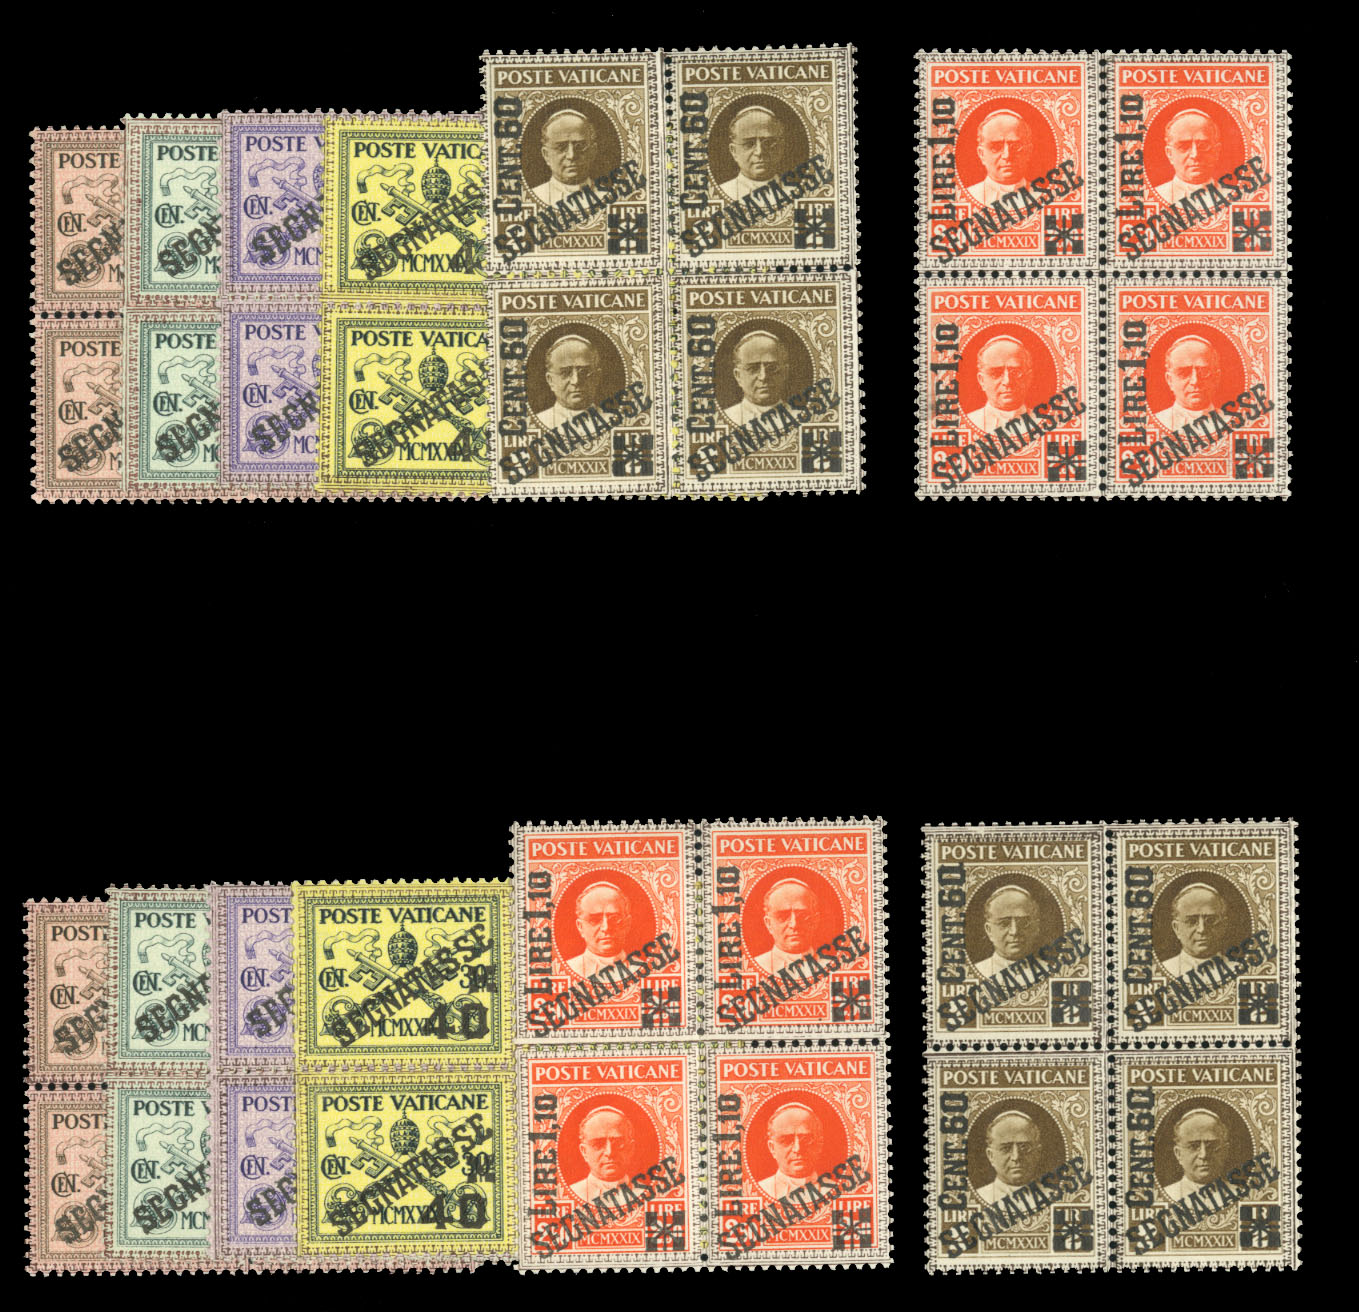 Lot 1372 - LARGE LOTS AND COLLECTIONS BRITISH COMMONWEALTH - Omnibus sets  -  Cherrystone Auctions U.S. & Worldwide Stamps & Postal History